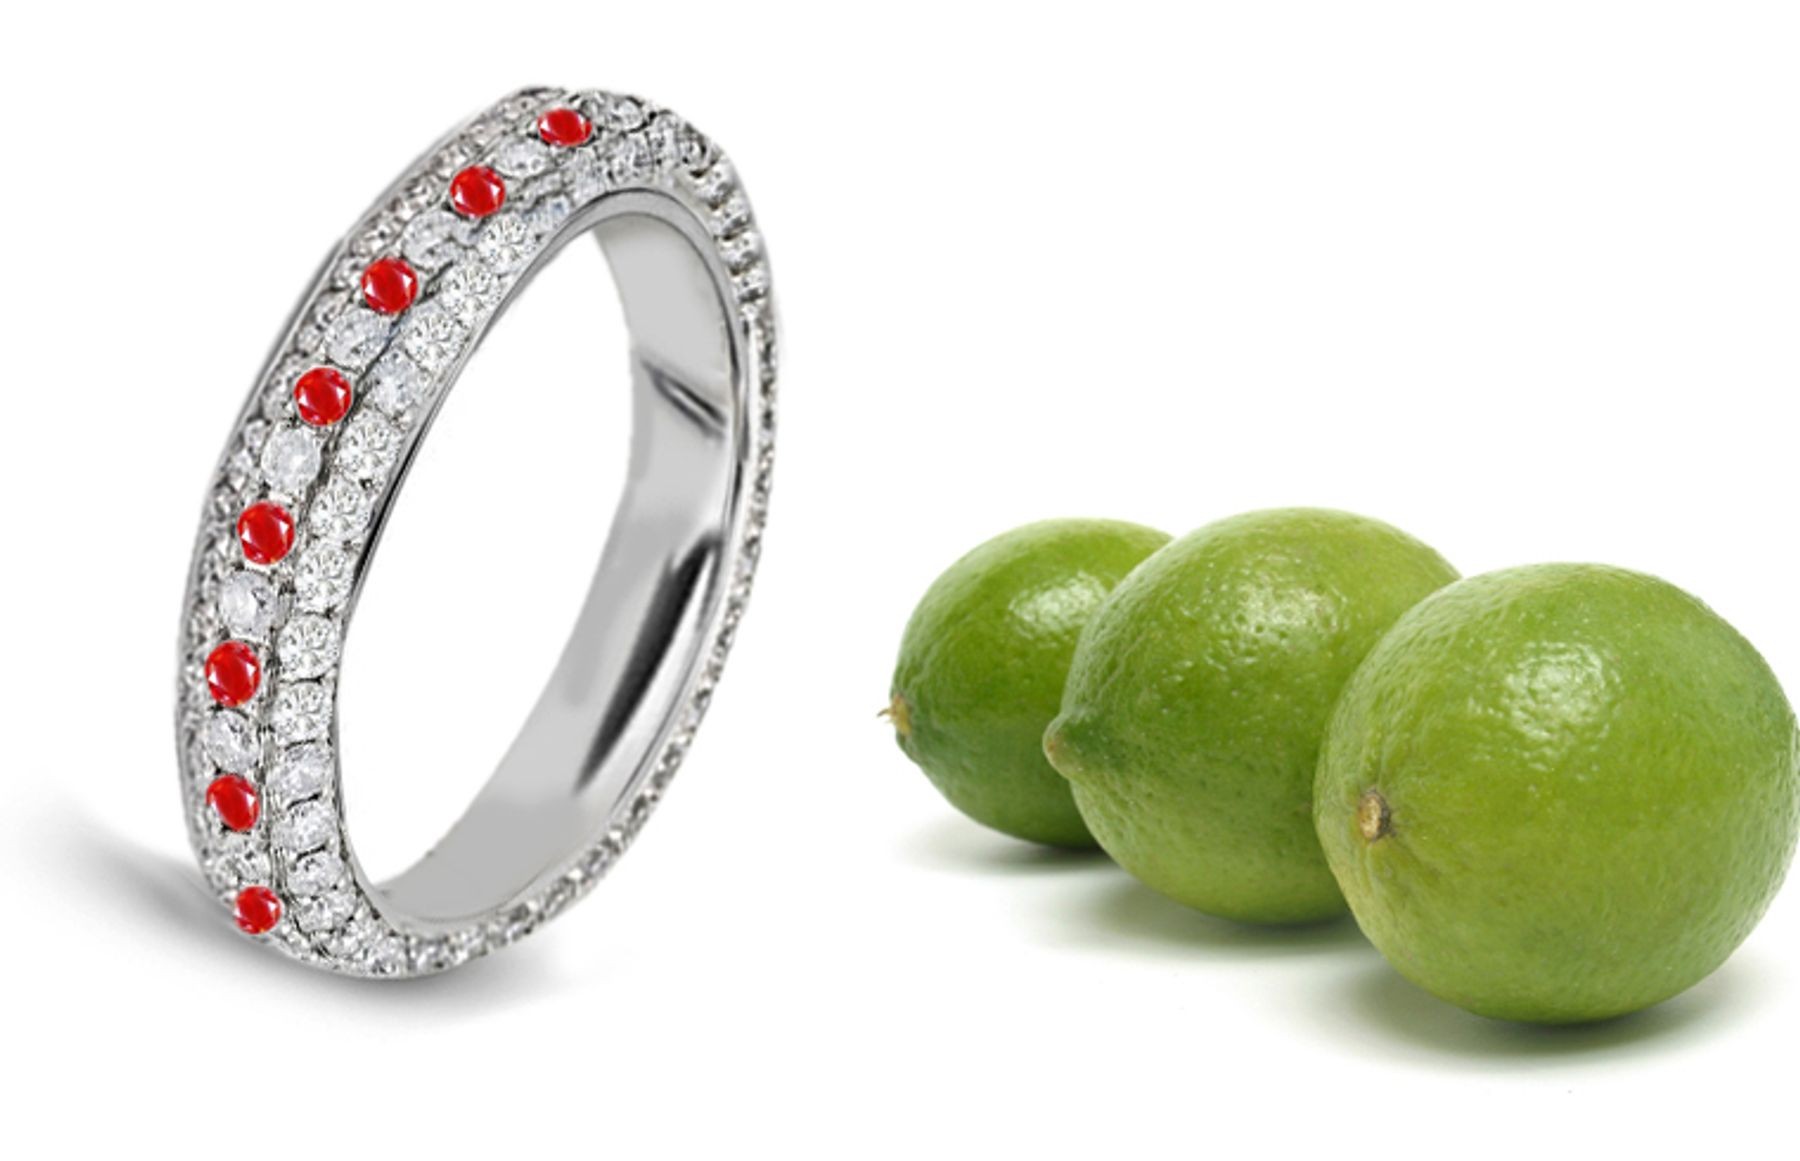 Intricate Detailing: Sparkling Diamond & Ruby pave Set Eternity Band in 14k White Gold